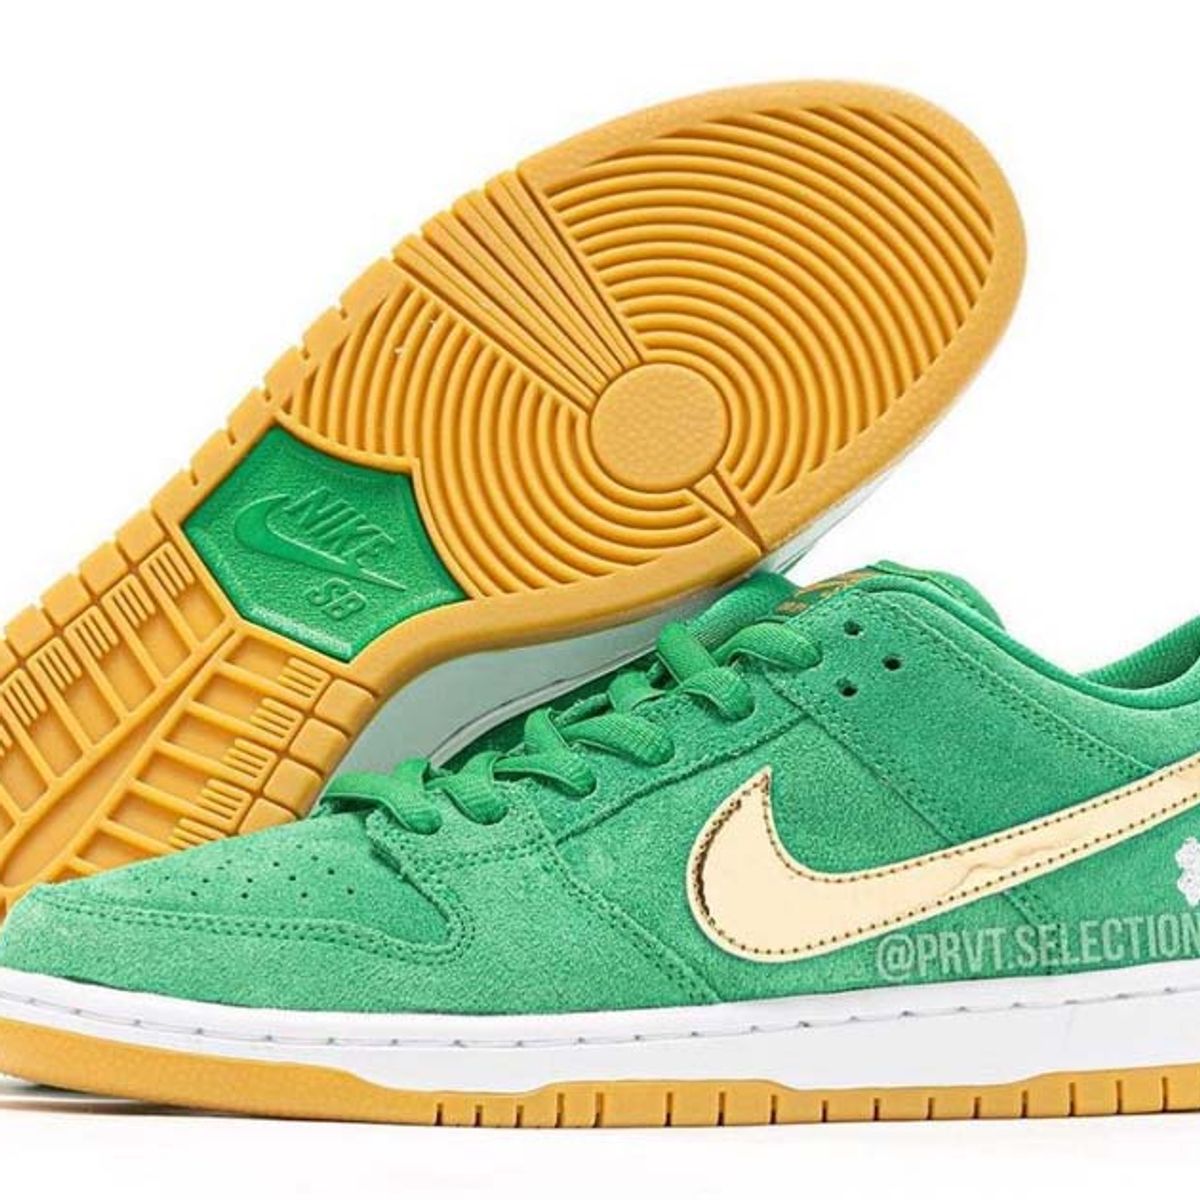 More Images: dunk low free Nike SB Dunk Low 'St. Patrick's Day' BQ6817-303